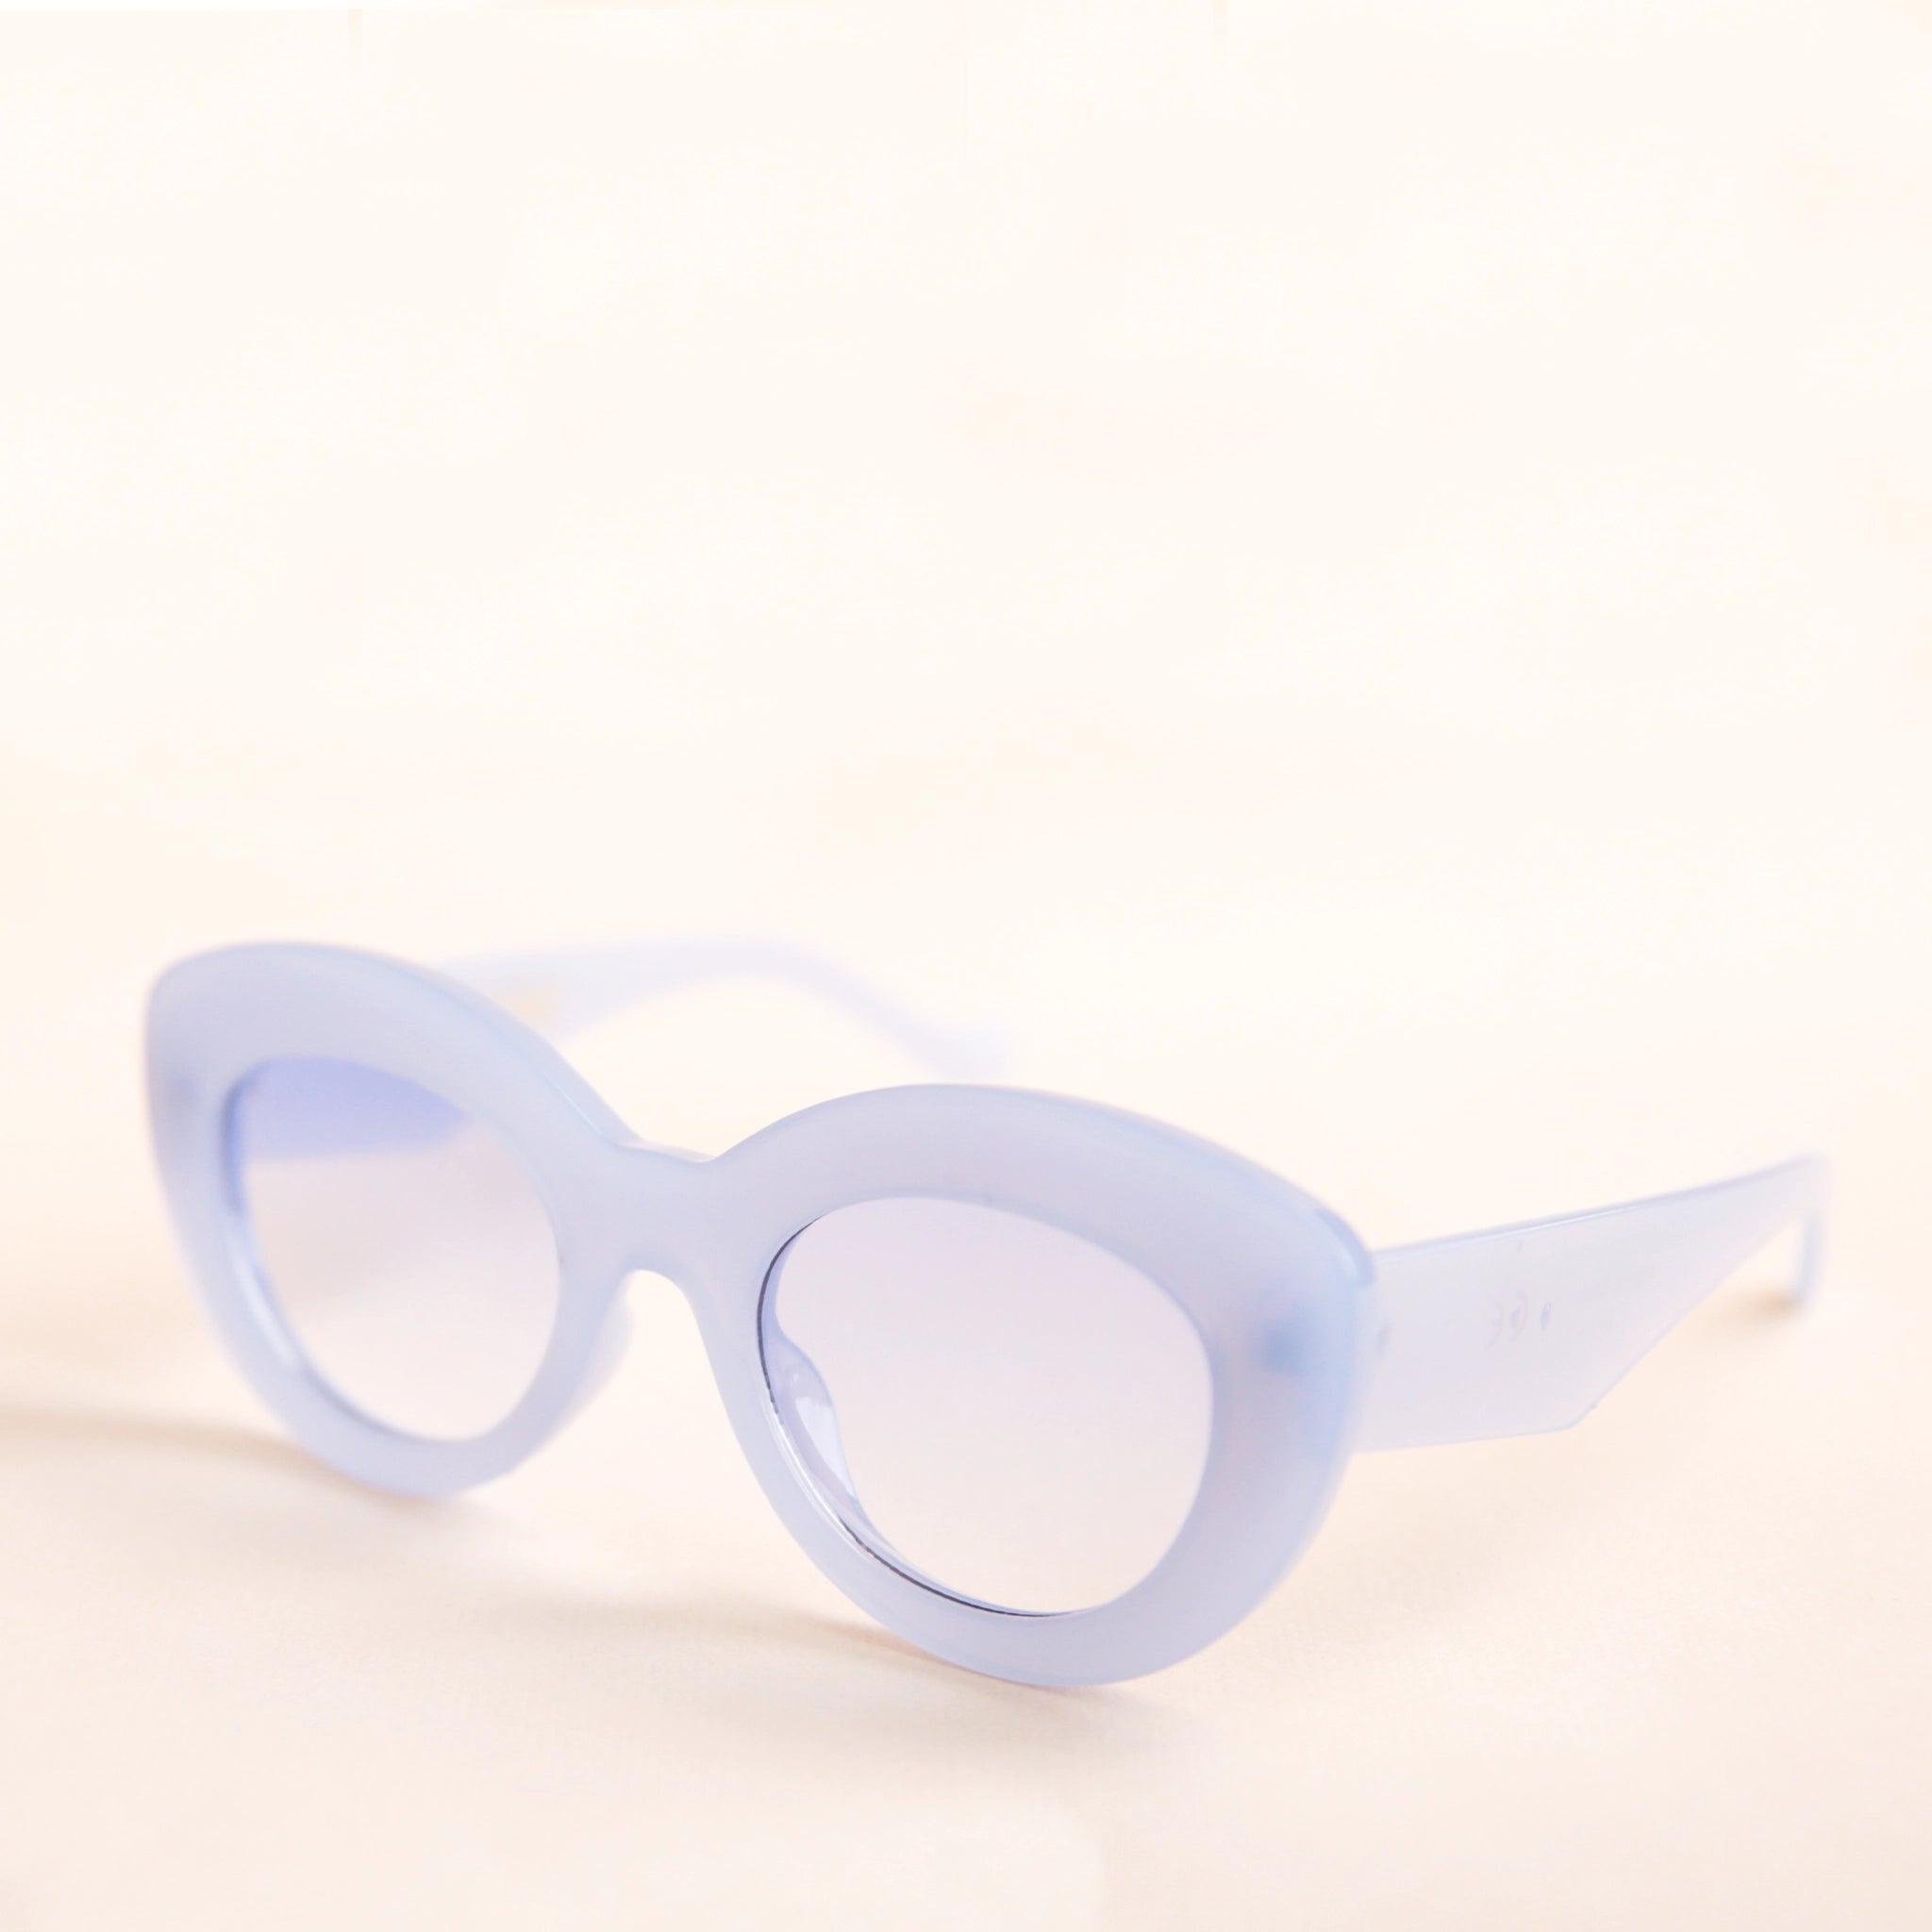 On a neutral background is the Gemma Sunglasses in a light blue shade. They have a rounded shape with a slight cateye flair at the corners. The frame material is a durable plastic and the lenses are a similar tone.